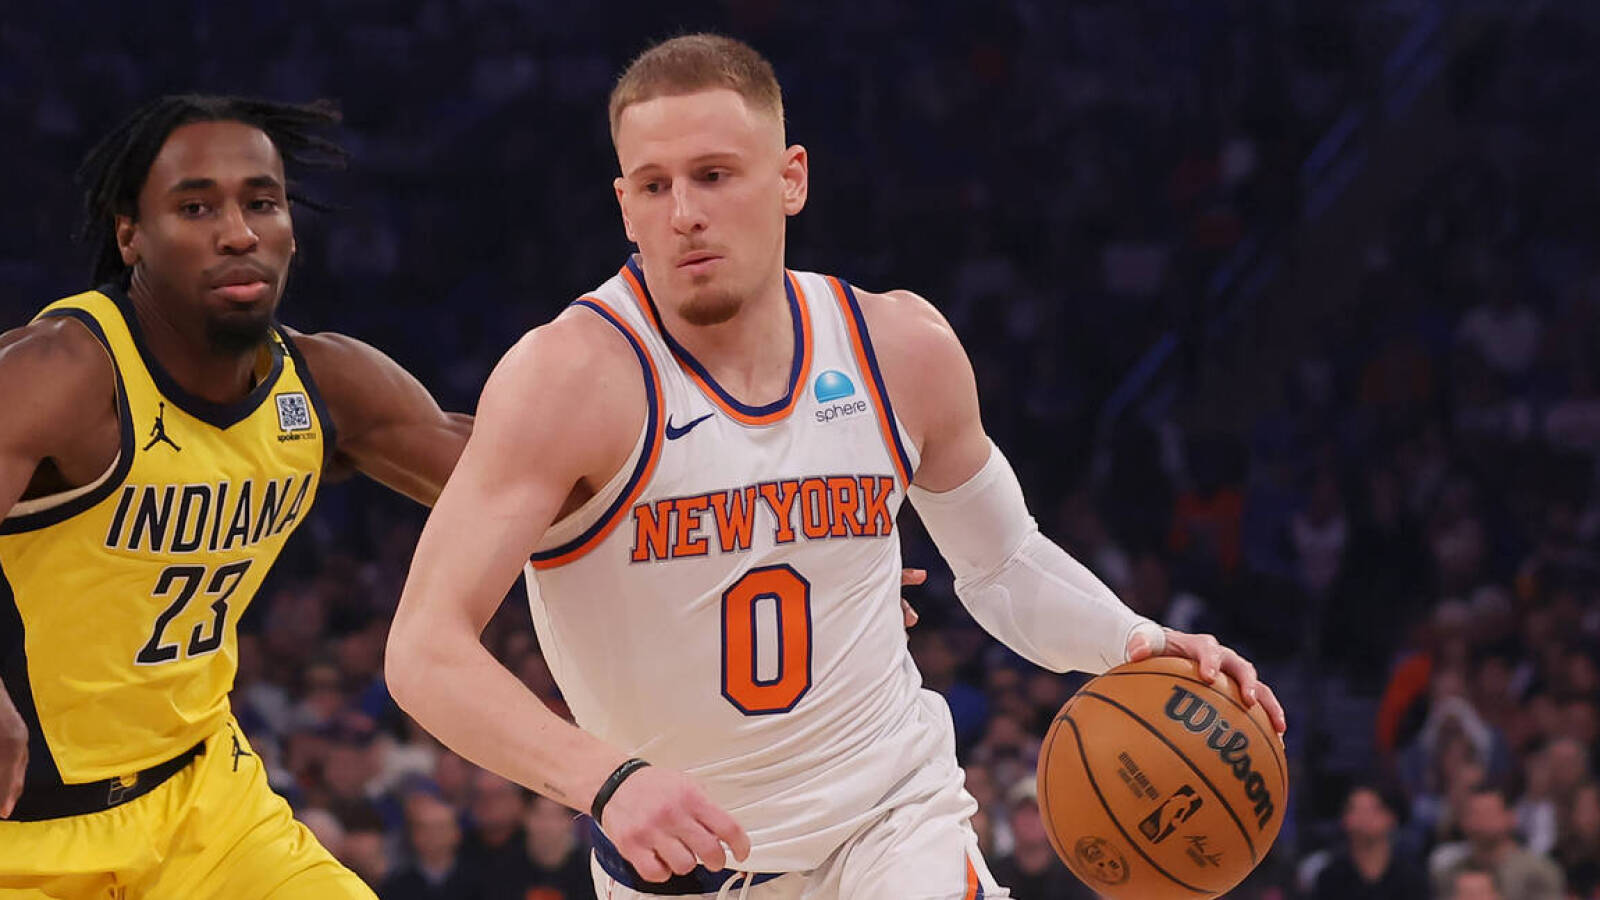 Watch: Knicks’ Donte DiVincenzo makes, absorbs big shot to win Game 1